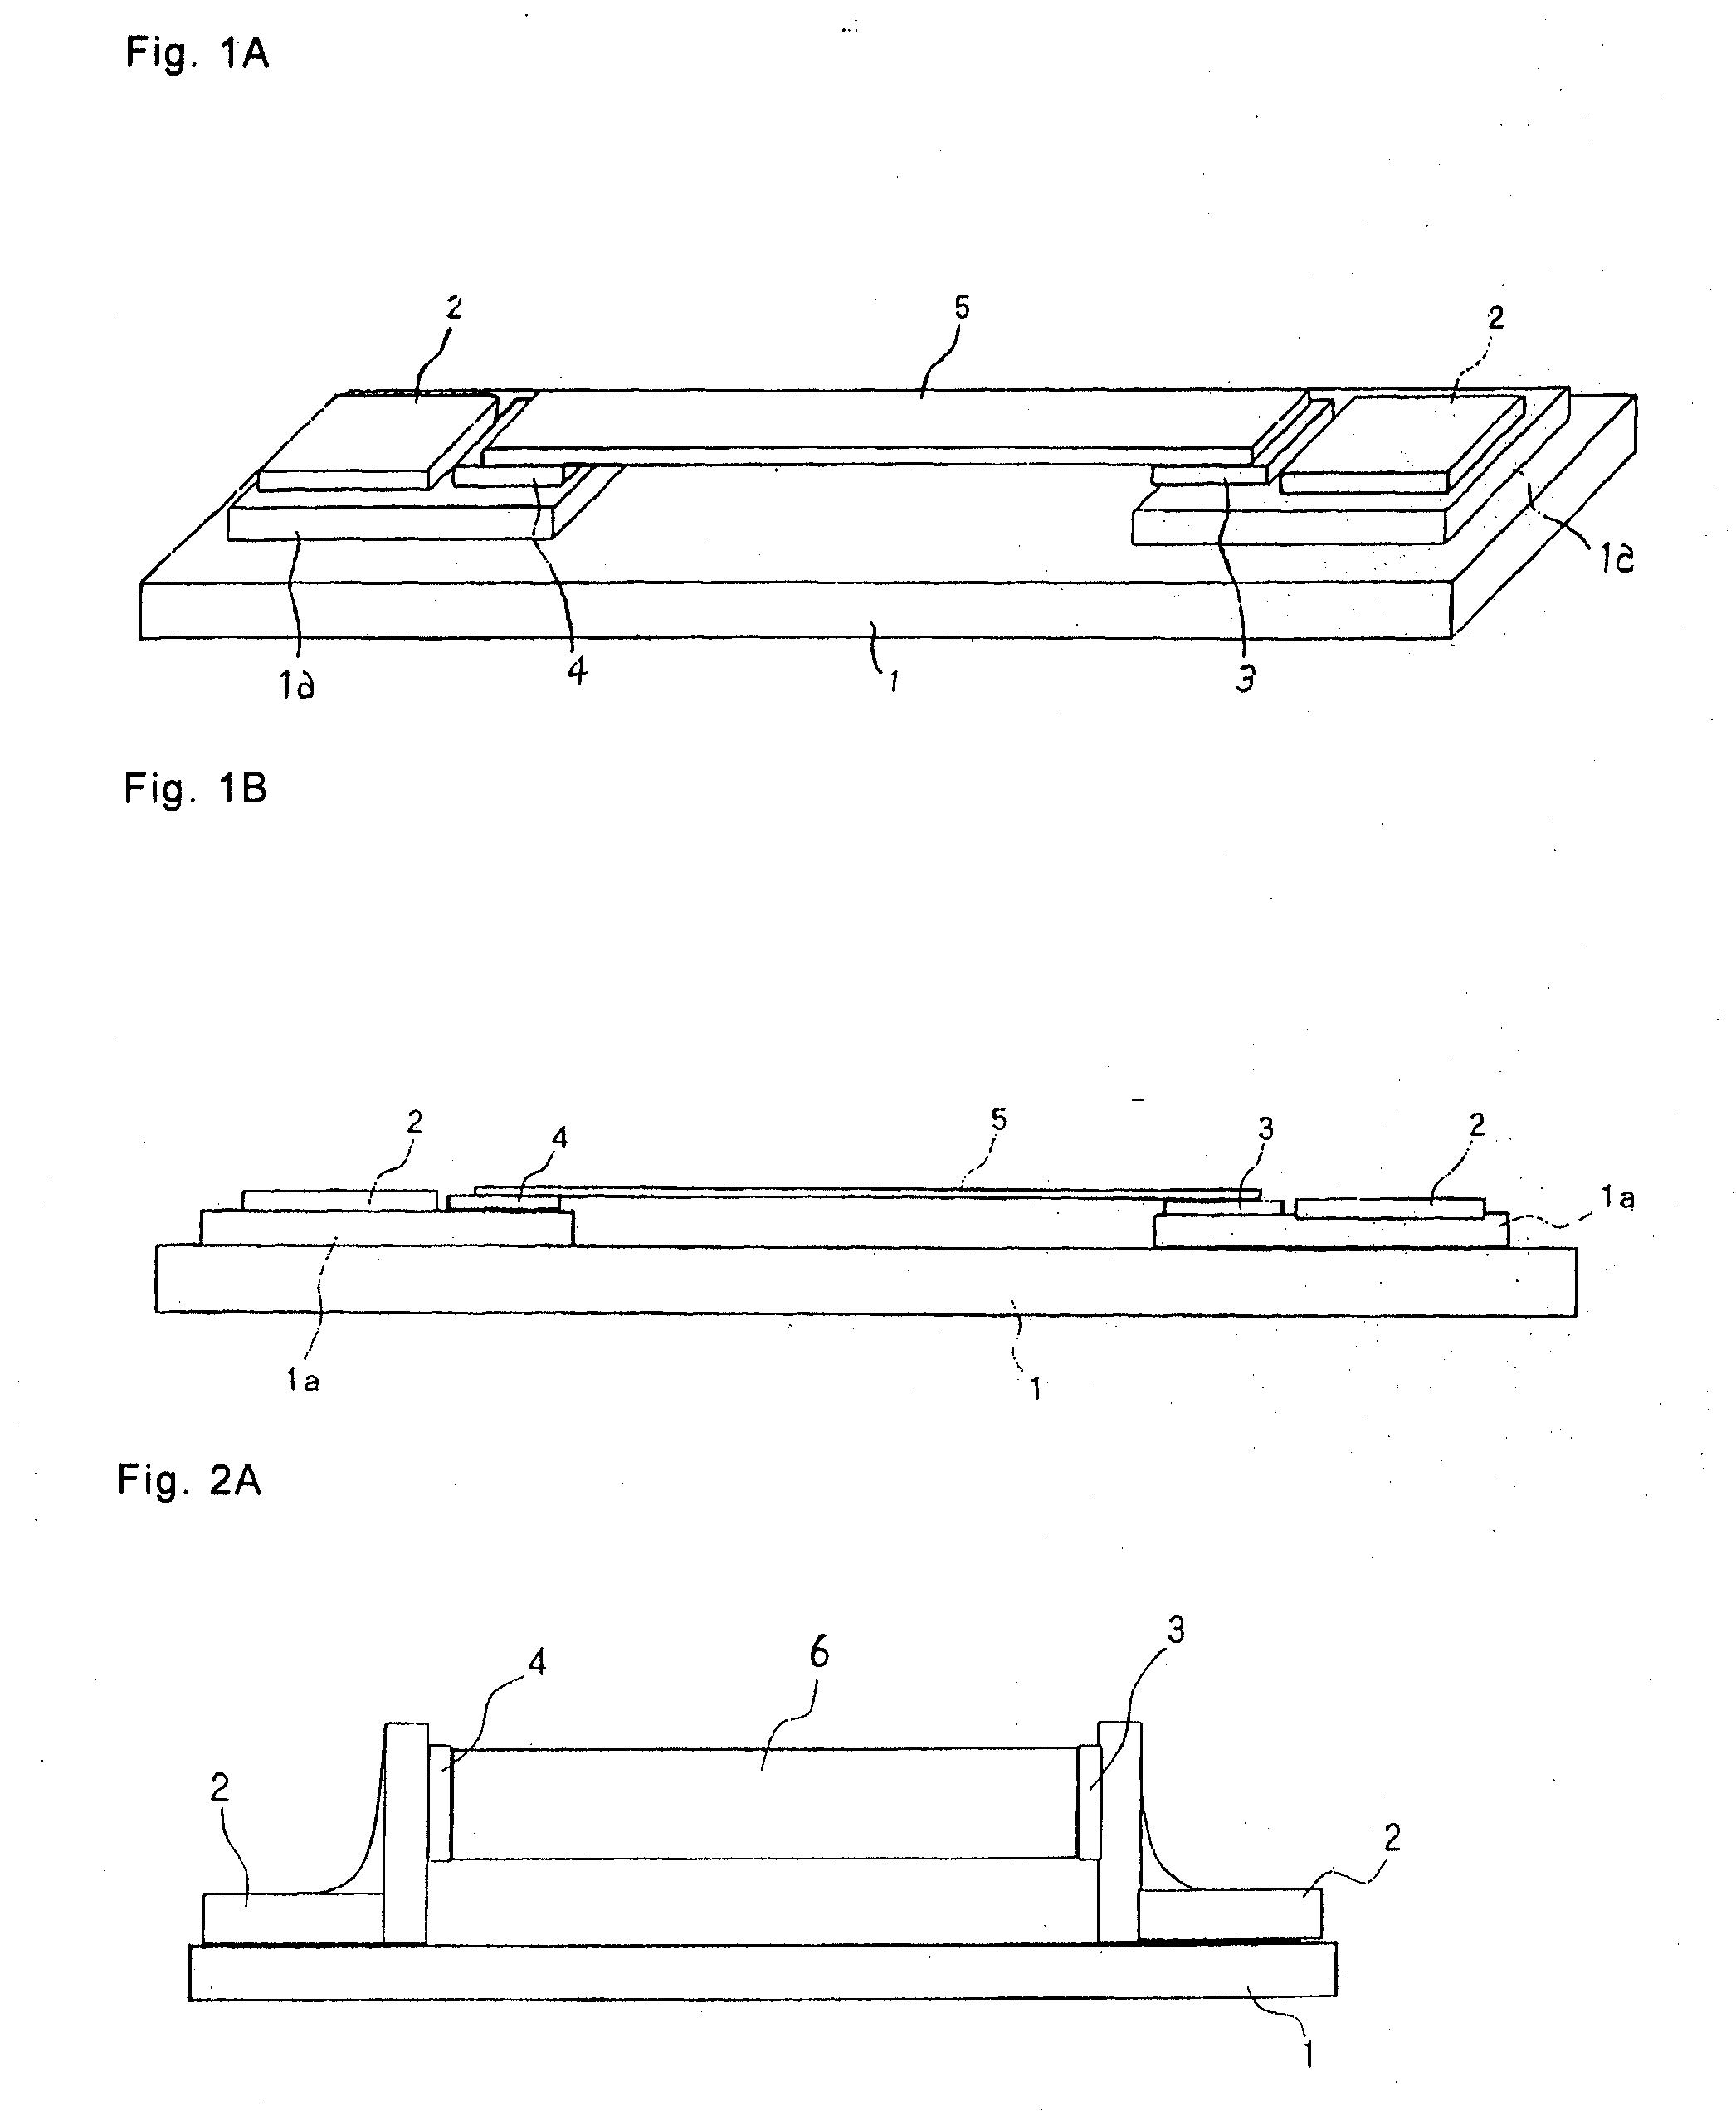 Connection structure of two-dimensional array optical element and optical circuit